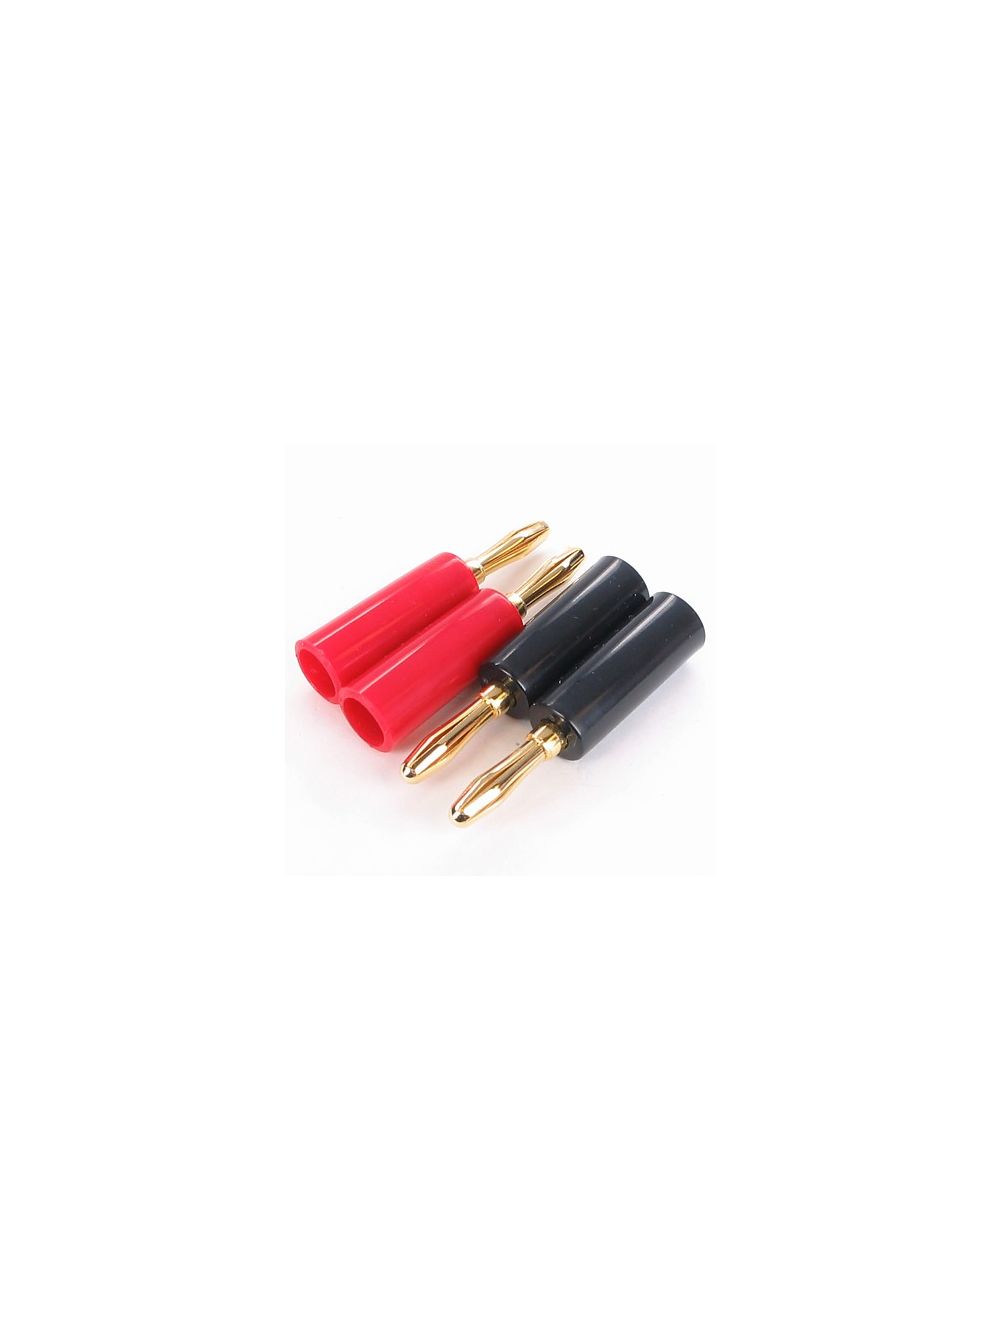 Overlander 4mm Banana Plugs Male & Female - 5 pieces 636